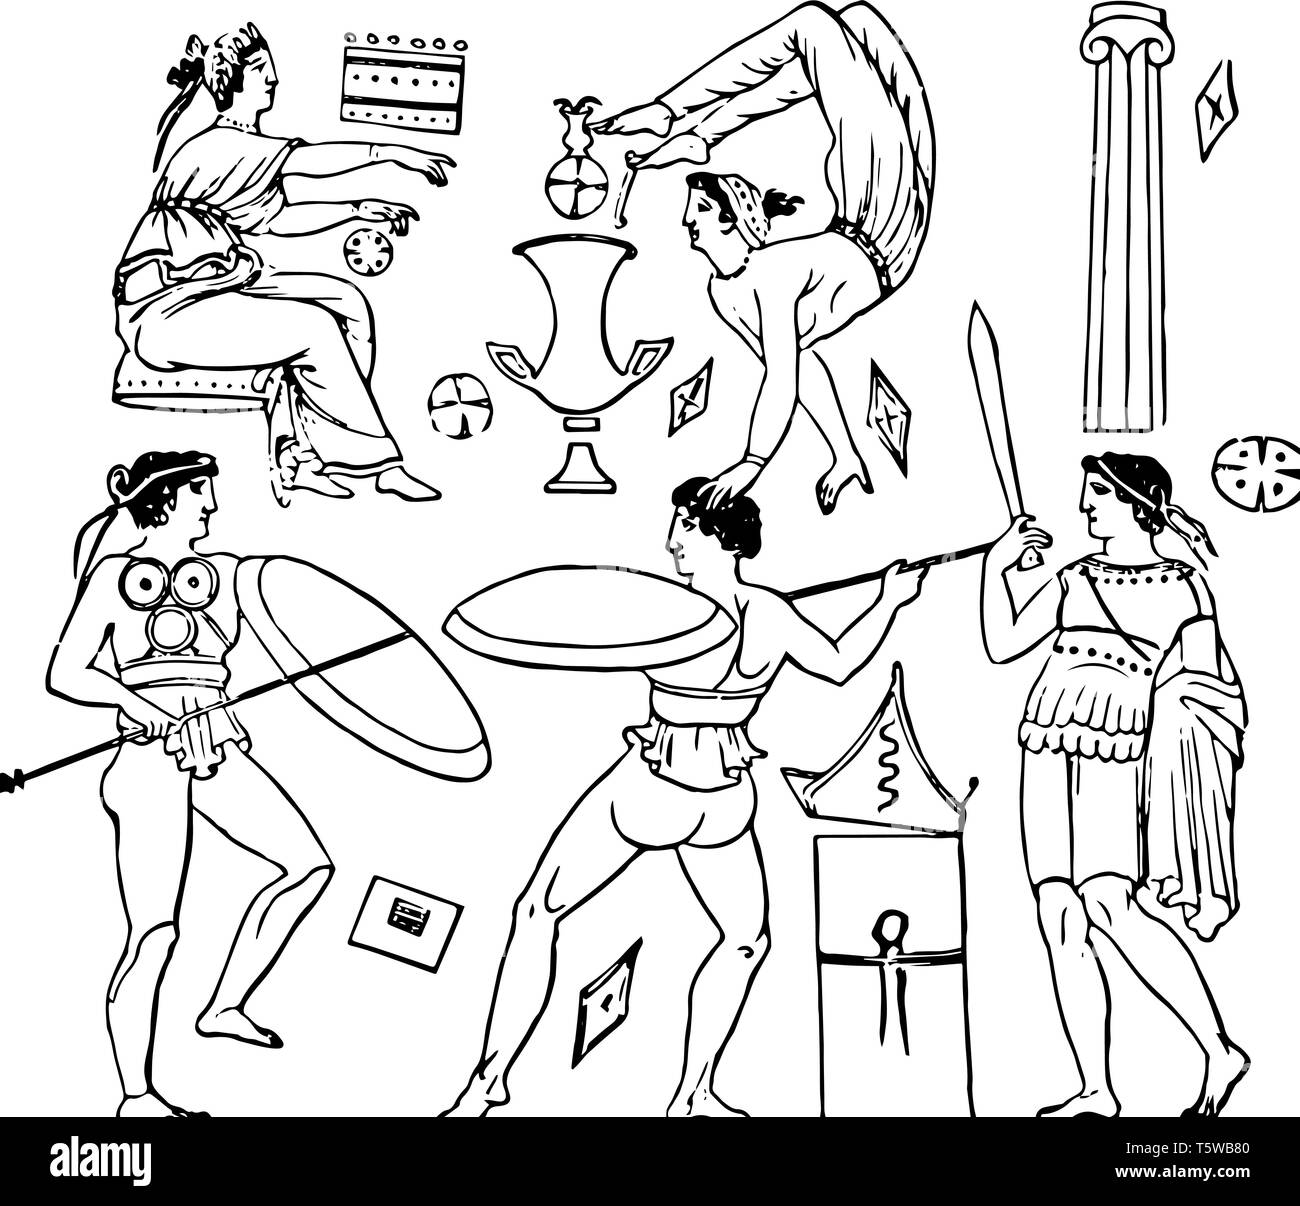 Pyrrhic Dance is the most famous of all the war and imitating by quick movements in modes in which an enemy is to be attacked vintage line drawing or  Stock Vector